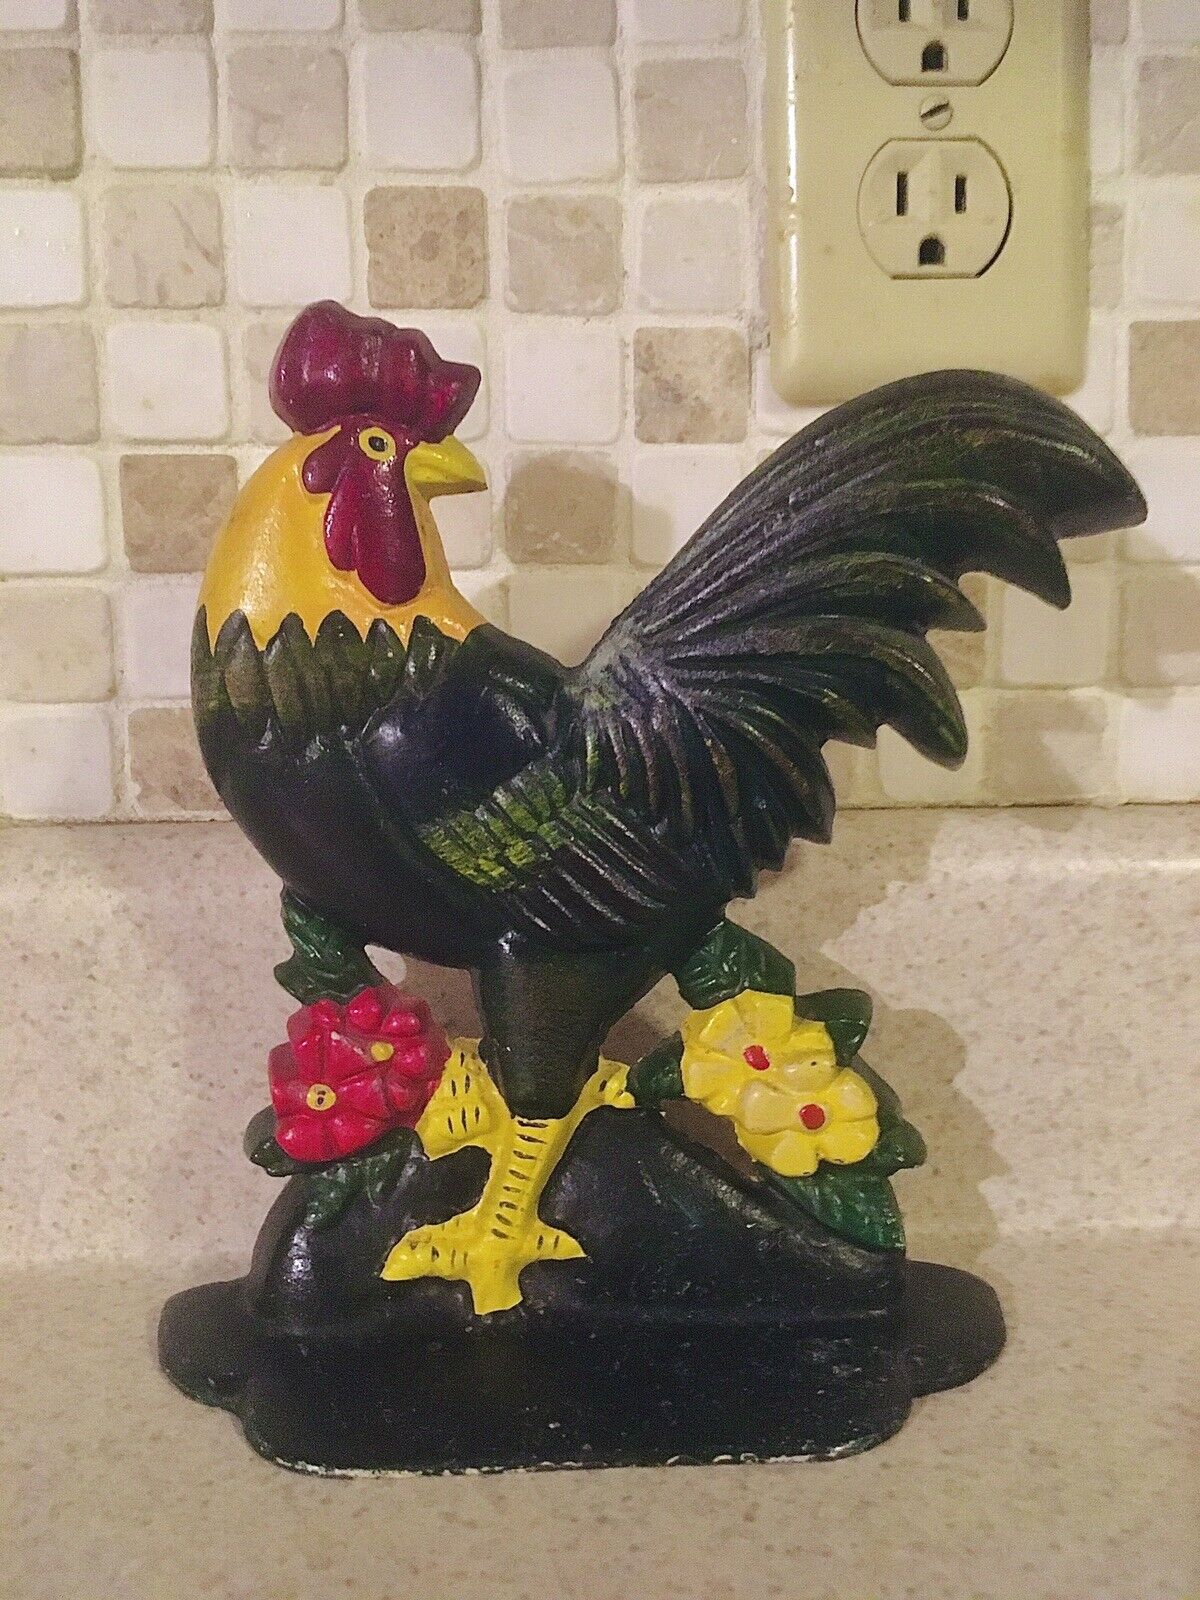 Vintage Standin Painted Metal Rooster Sculpture, Old Fashioned Figurine 8x6.5\